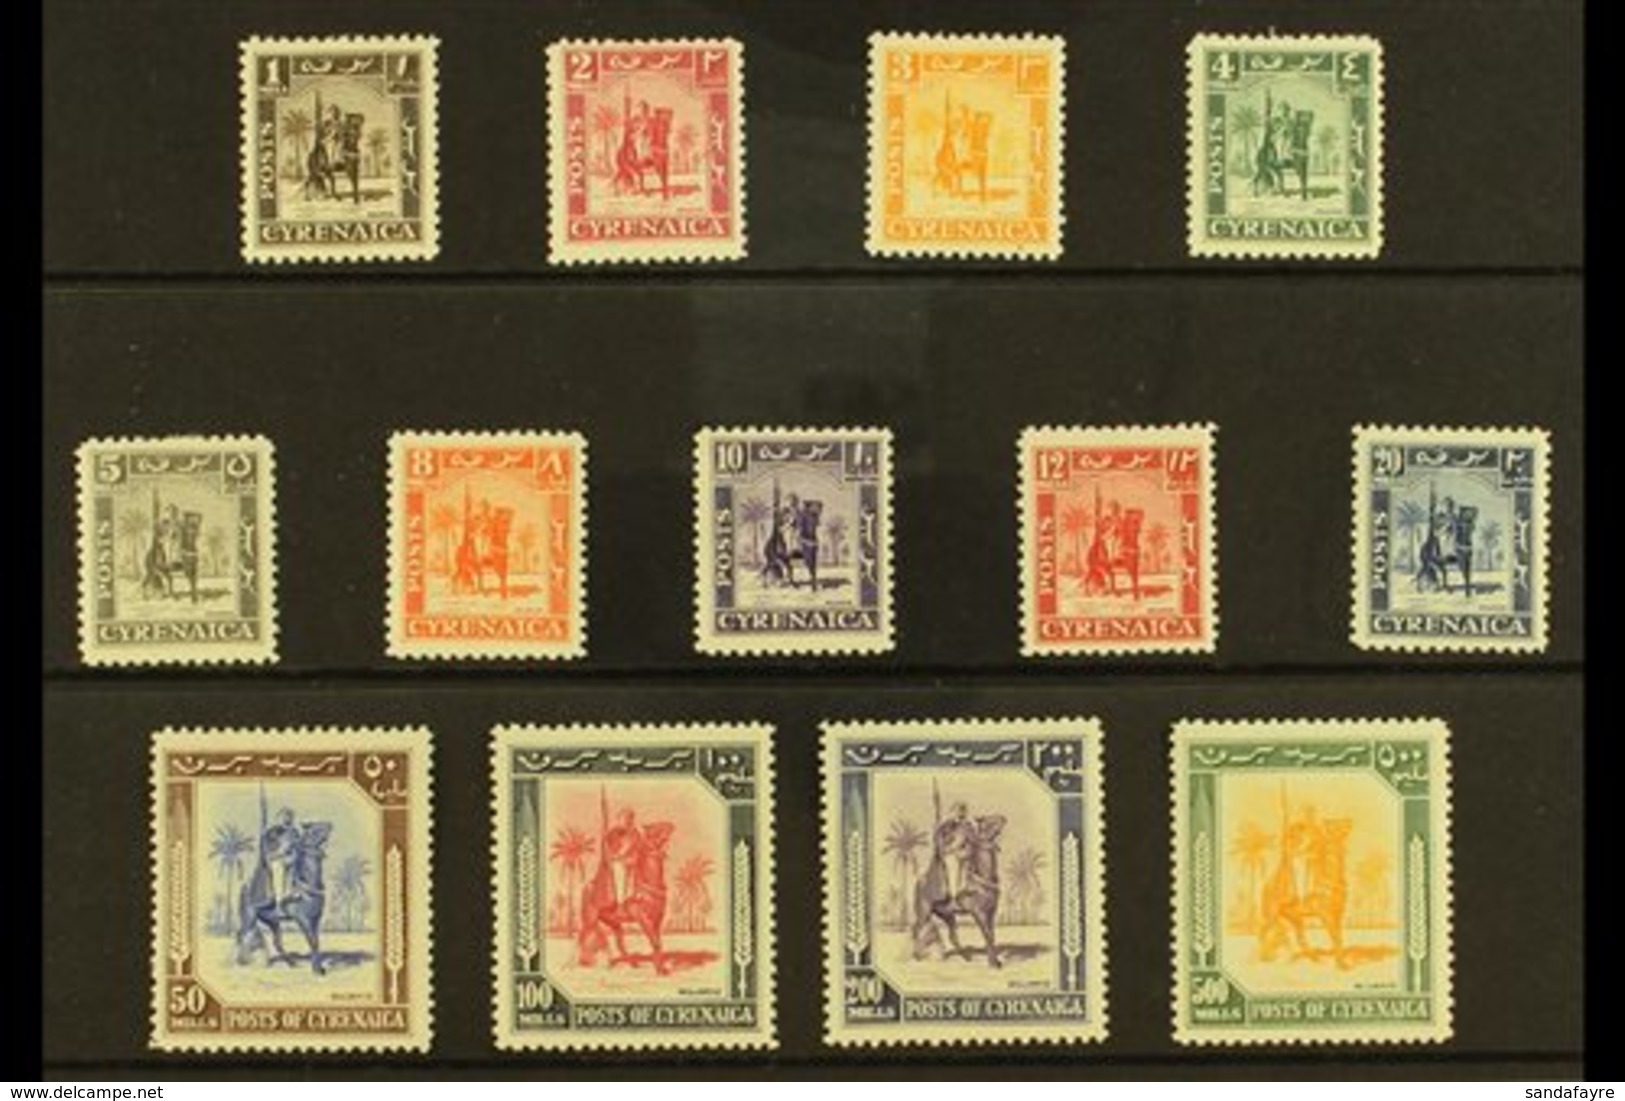 CYRENAICA 1950 "Mounted Warrior" Complete Definitive Set, SG 136/148, Very Fine Mint. (13 Stamps) For More Images, Pleas - Afrique Orientale Italienne